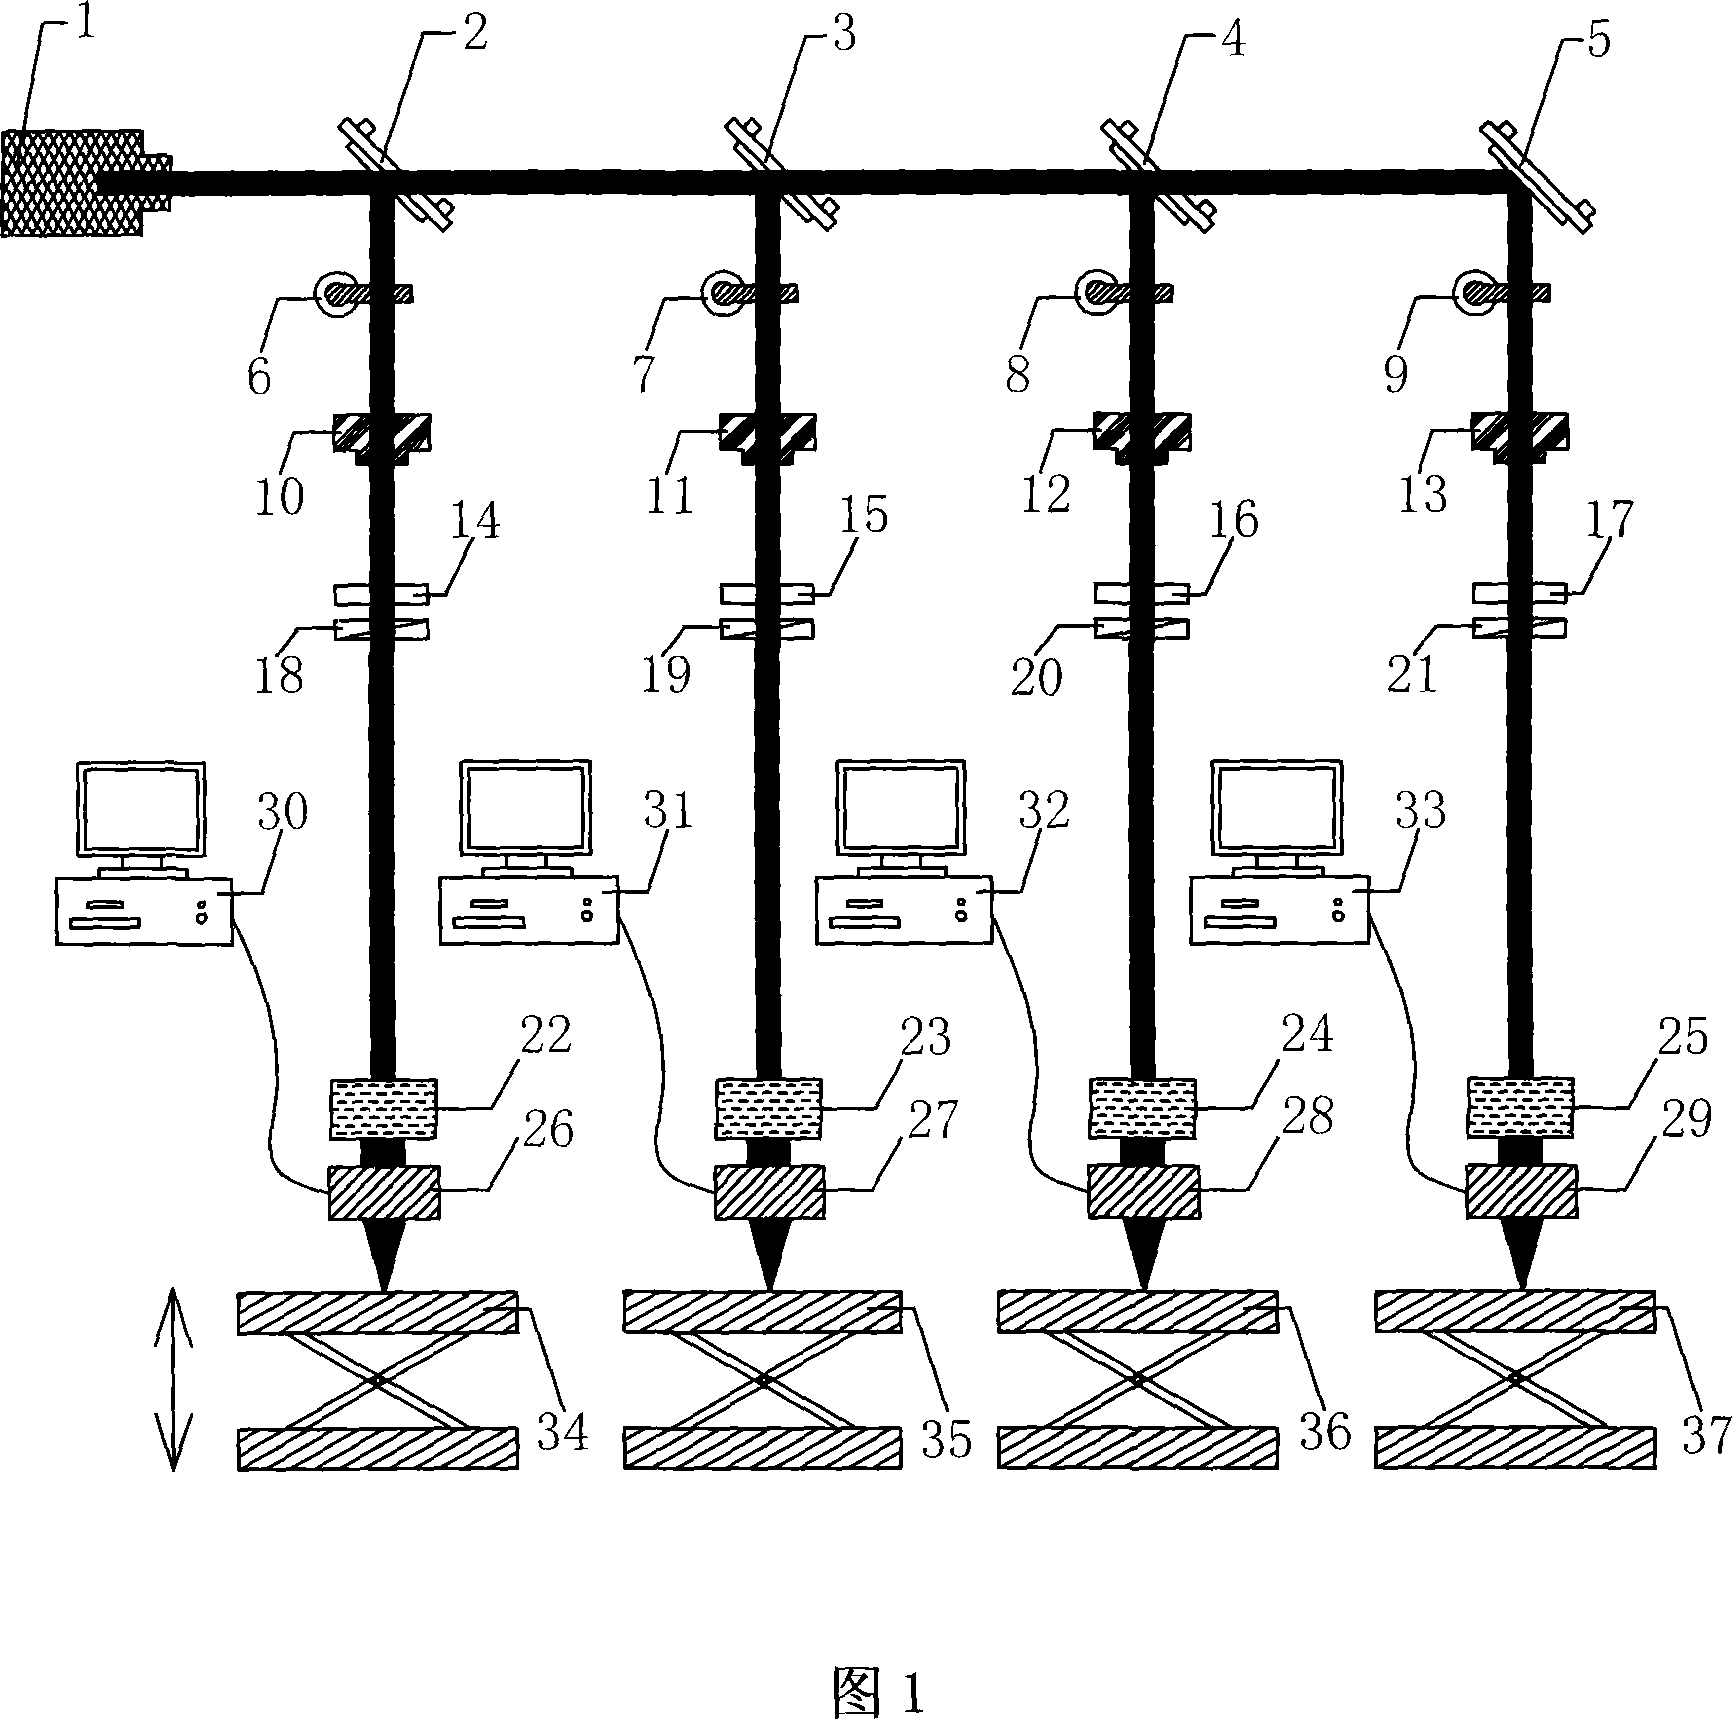 Distributed laser processing system